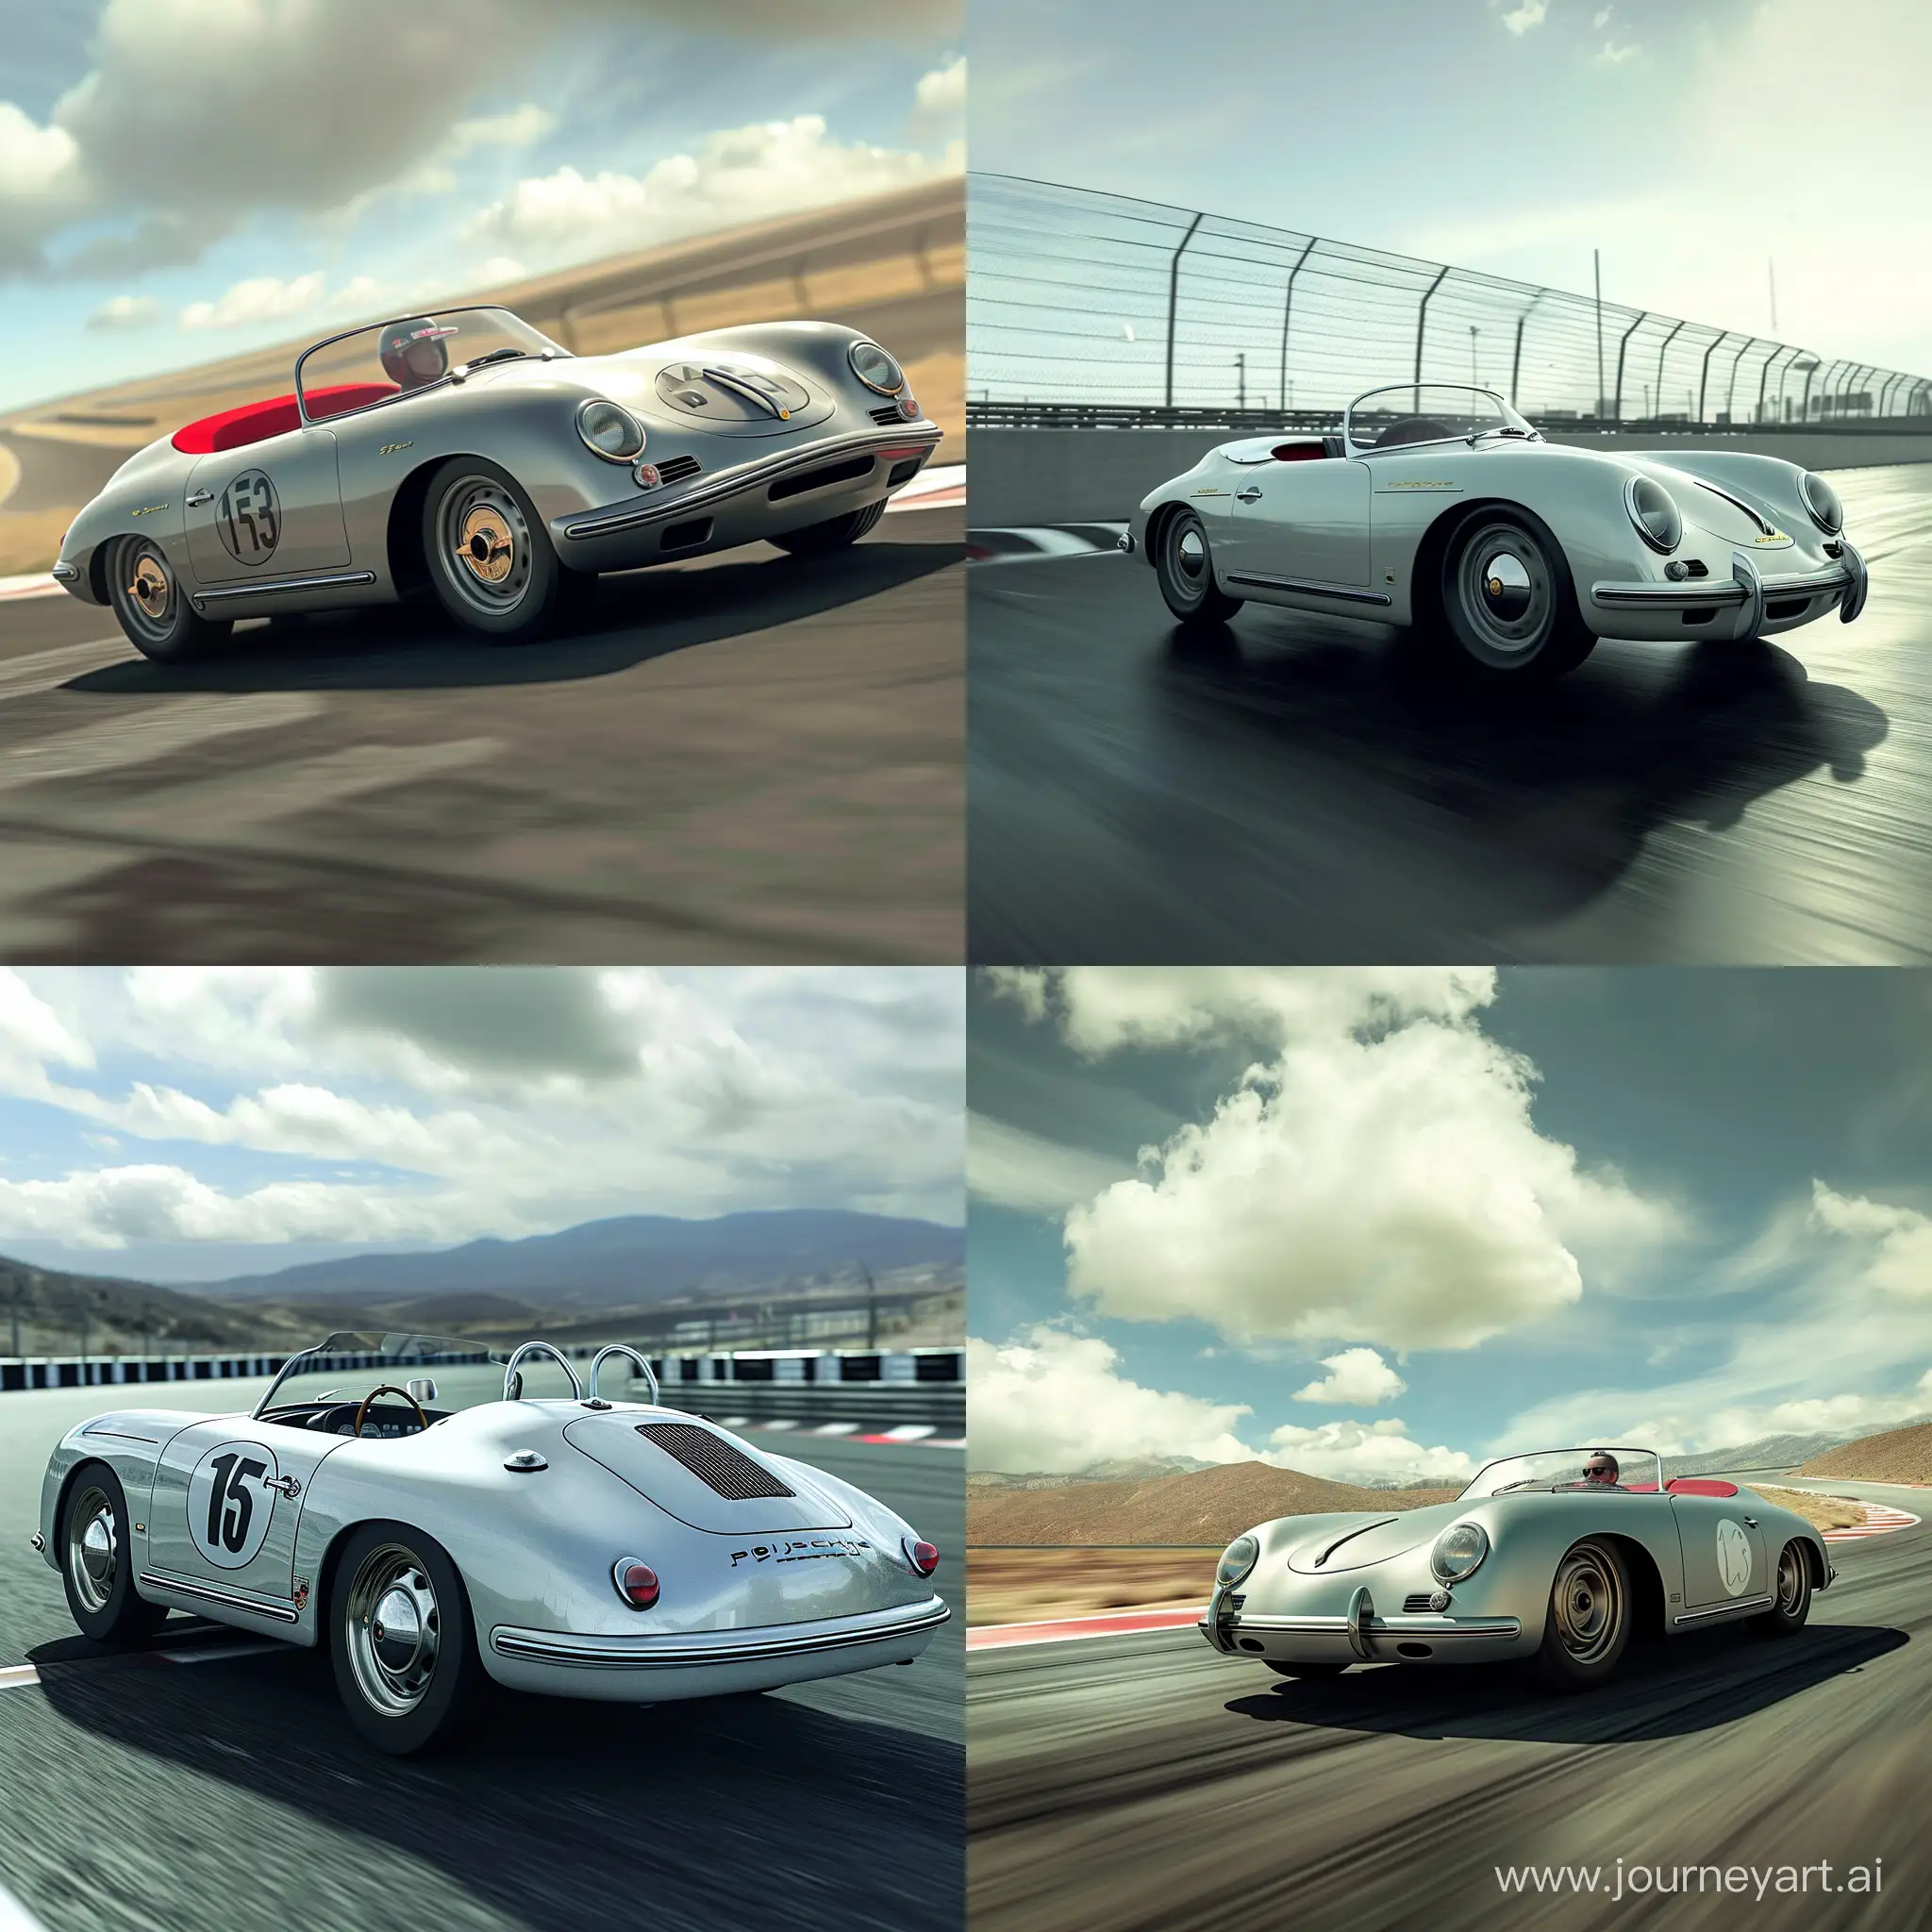 Make me a realistic image of a Porsche 550 Spyder like the one that James Dean drove, in  a real driving panorama in a racing environment